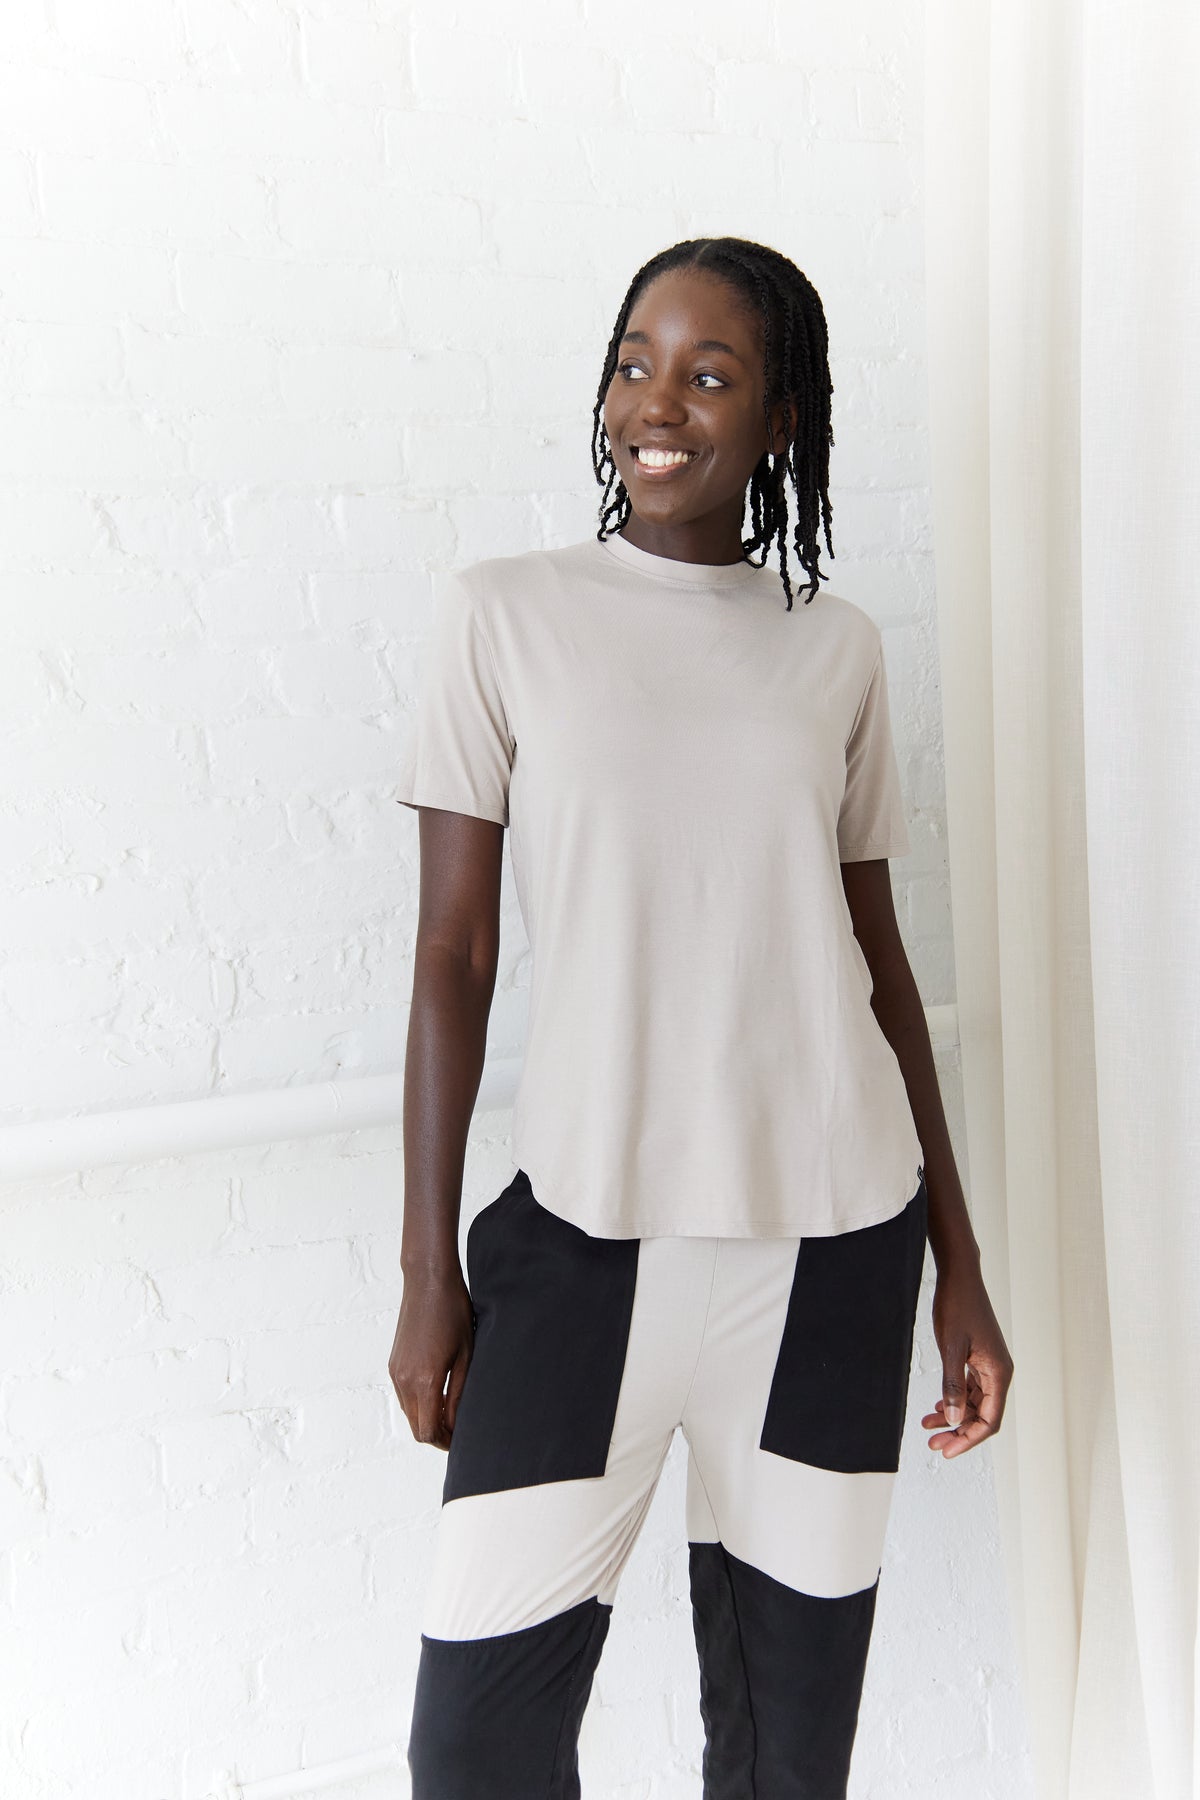 The Crew Neck - Almond by Cassandra Elizabeth is an ethically made, minimalist wardrobe essential, and is the epitome of quiet luxury.